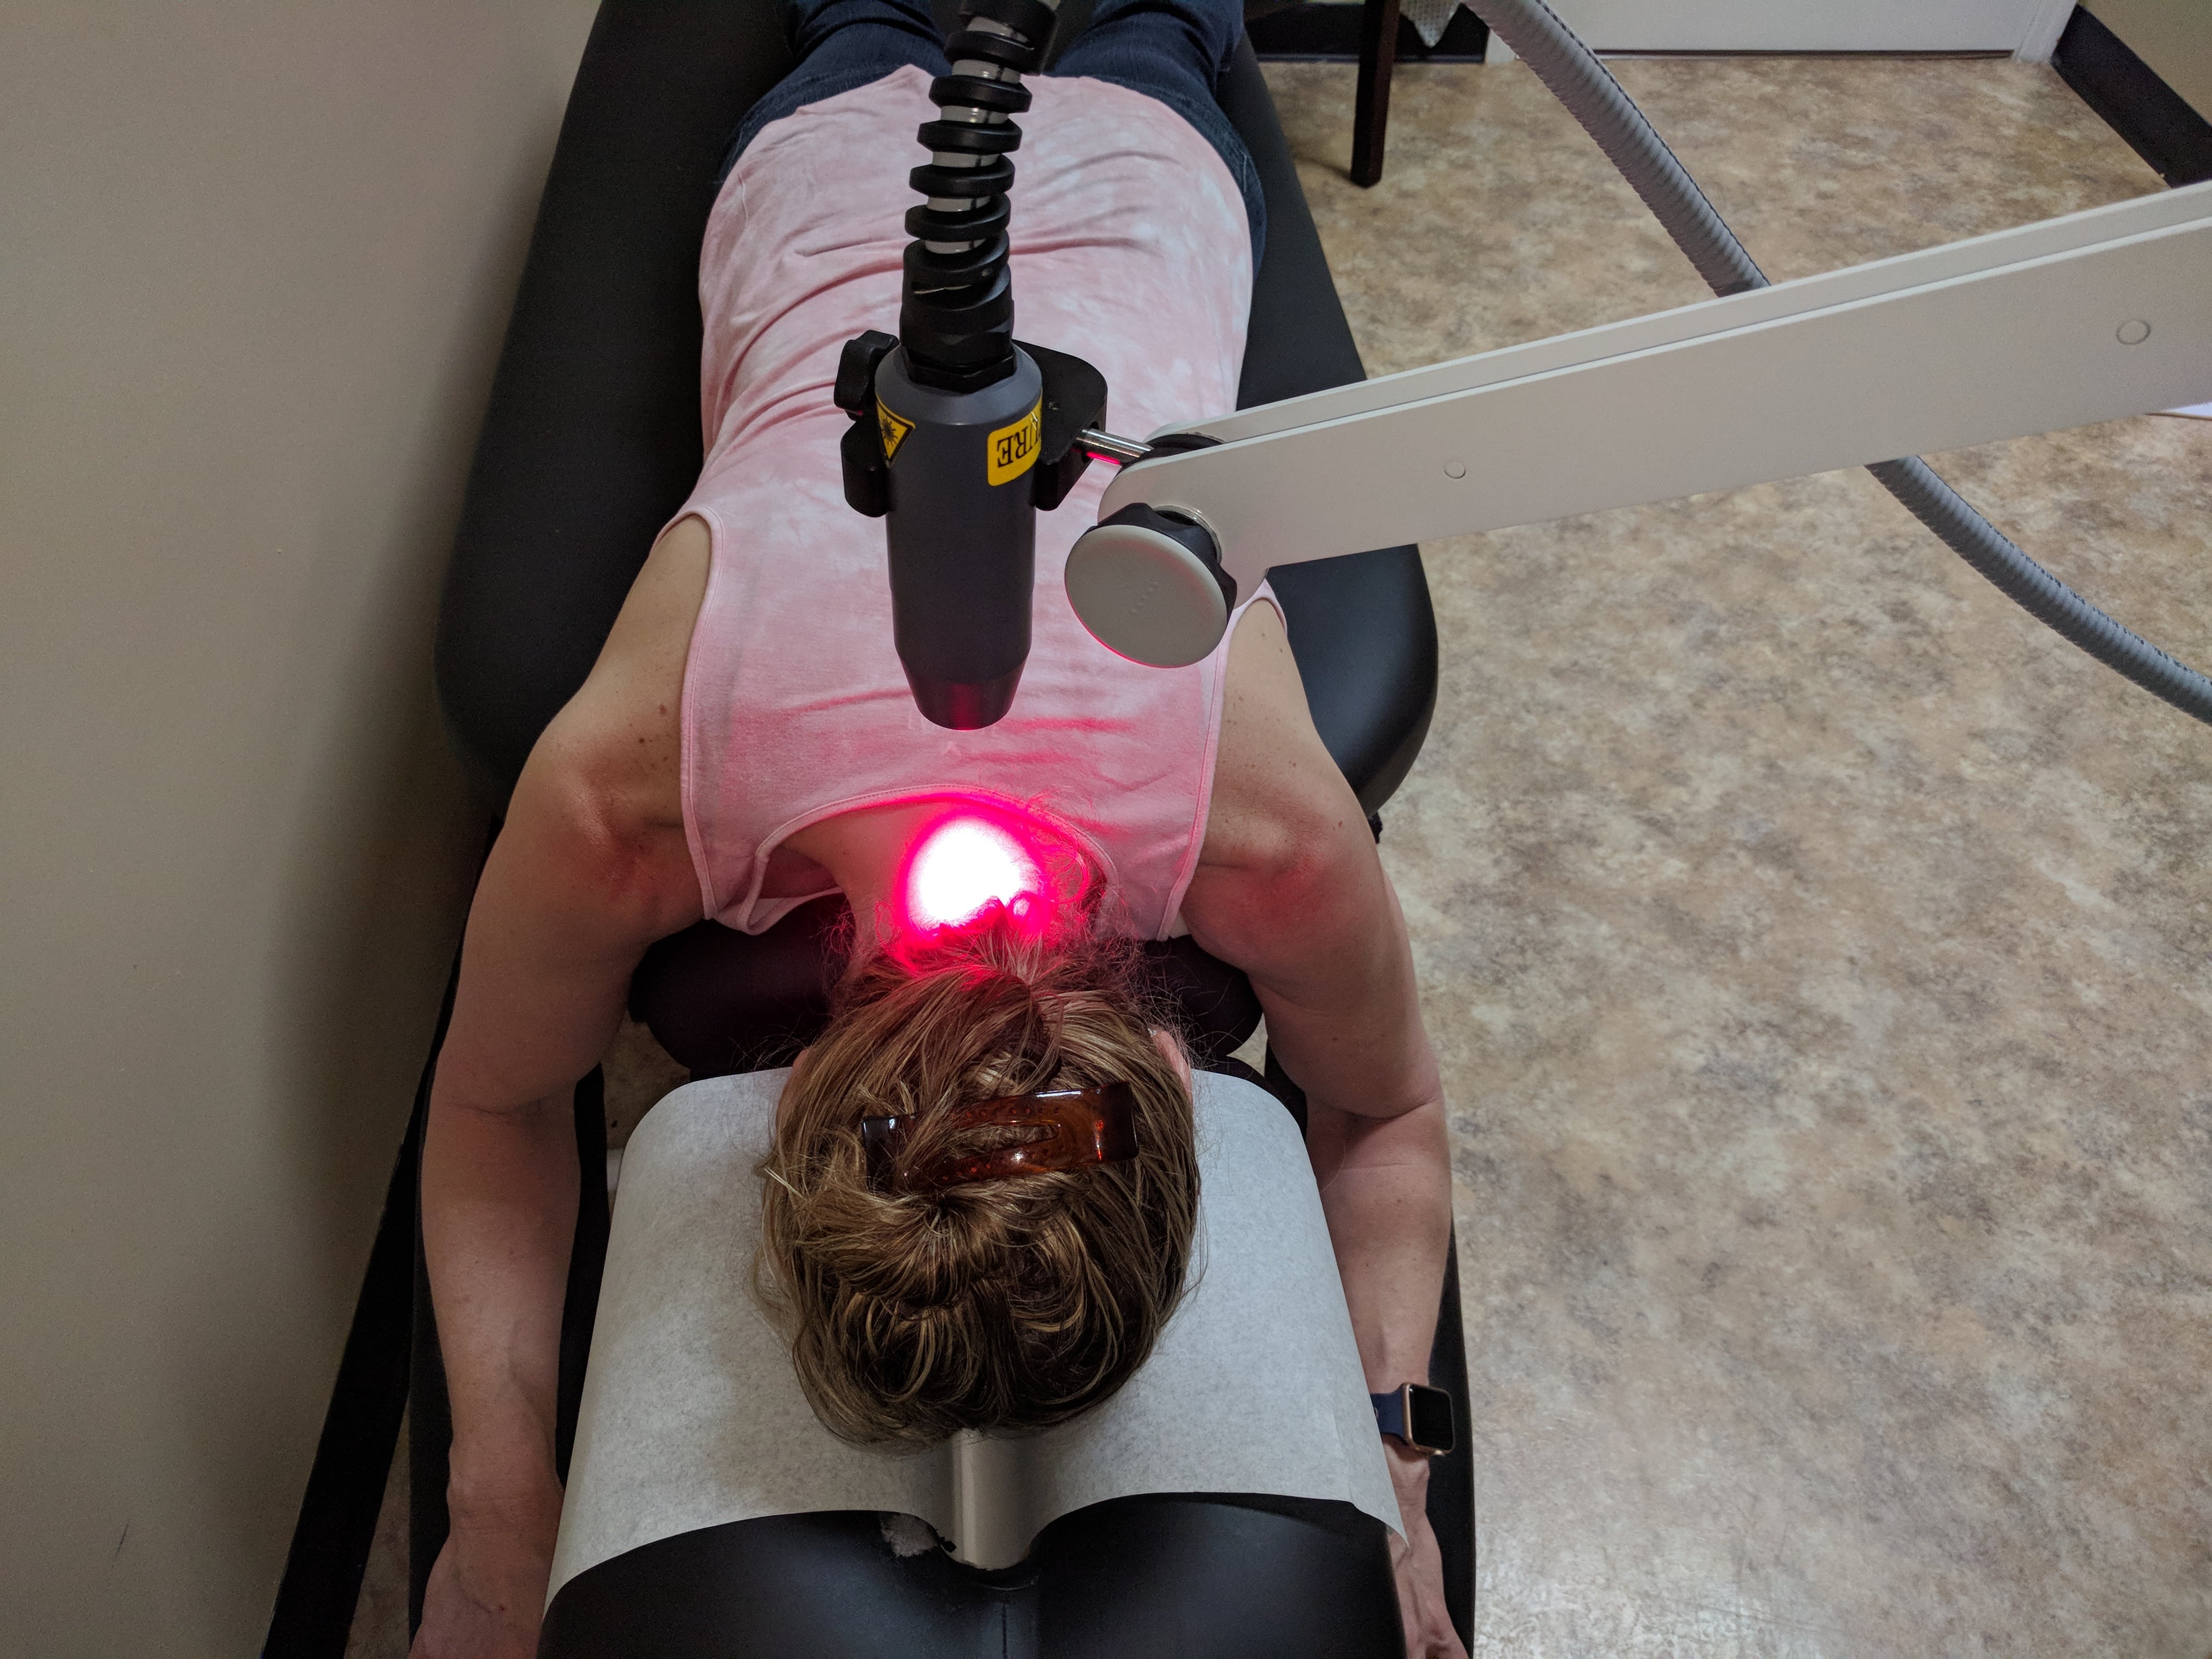 Laser Therapy Stamford Ct